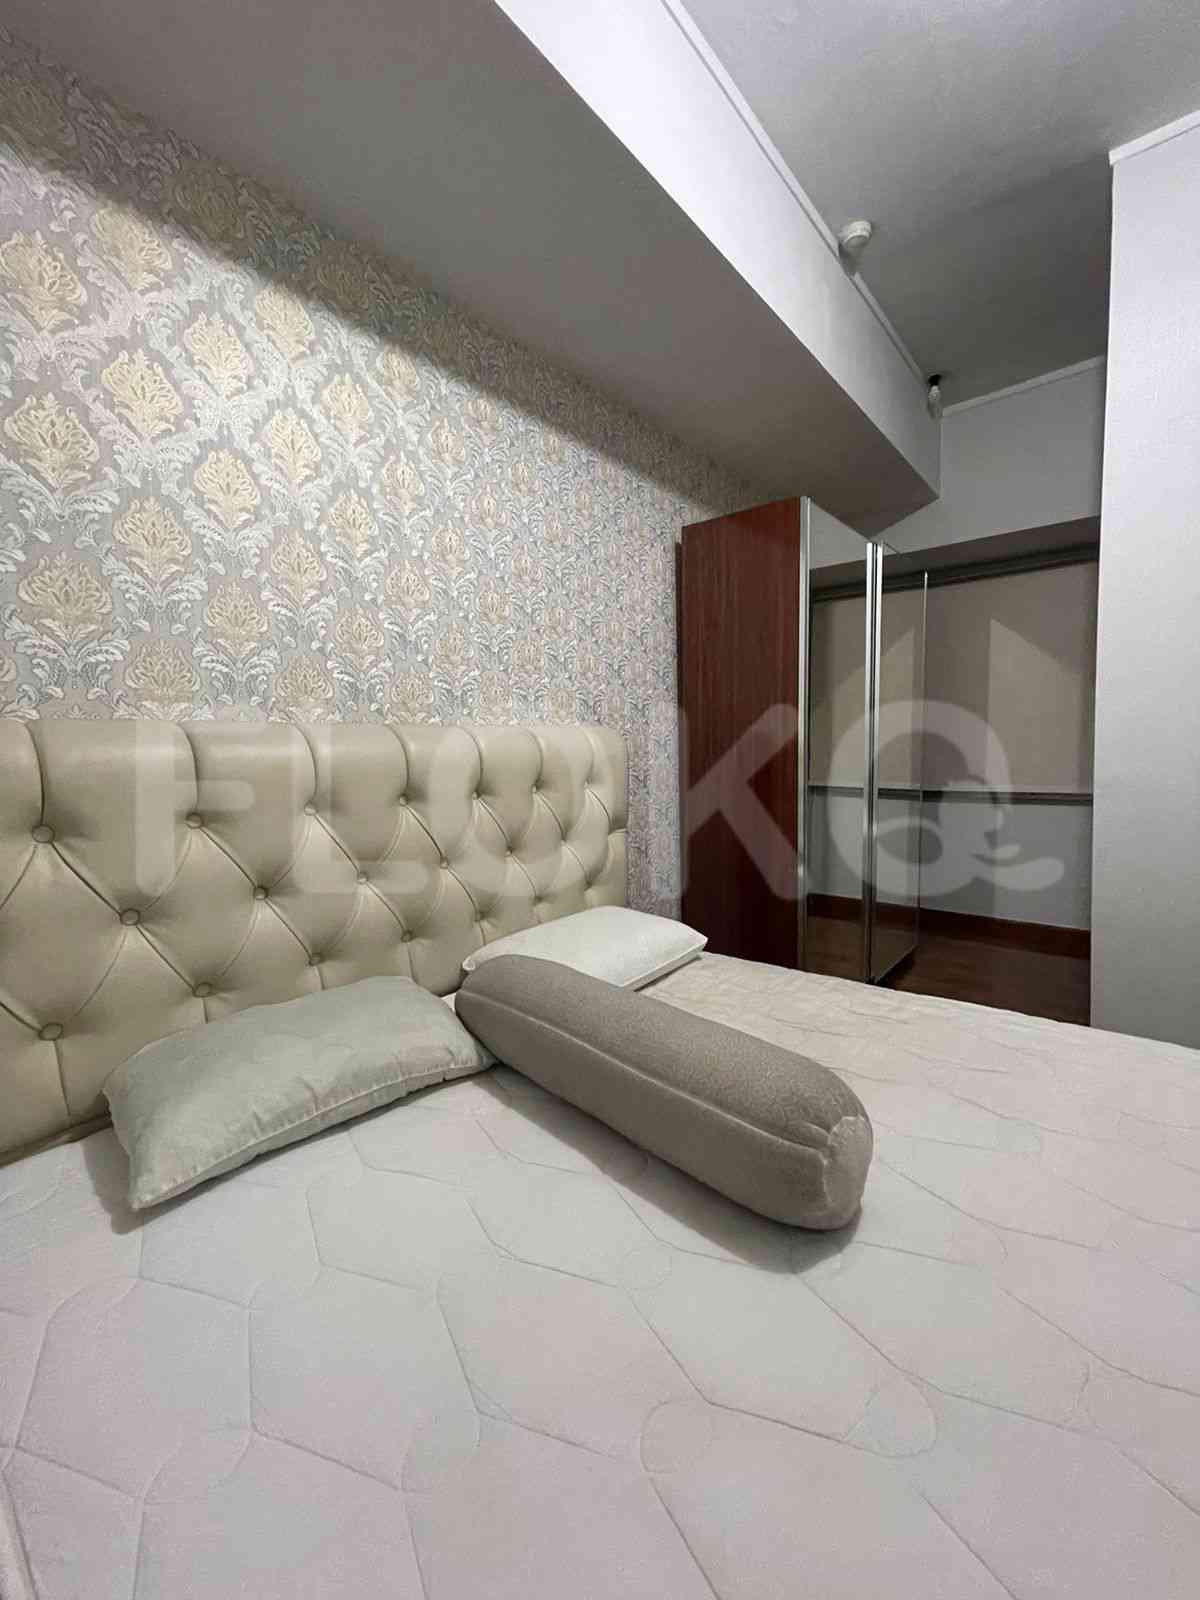 2 Bedroom on 18th Floor for Rent in Seasons City Apartment - fgr682 13